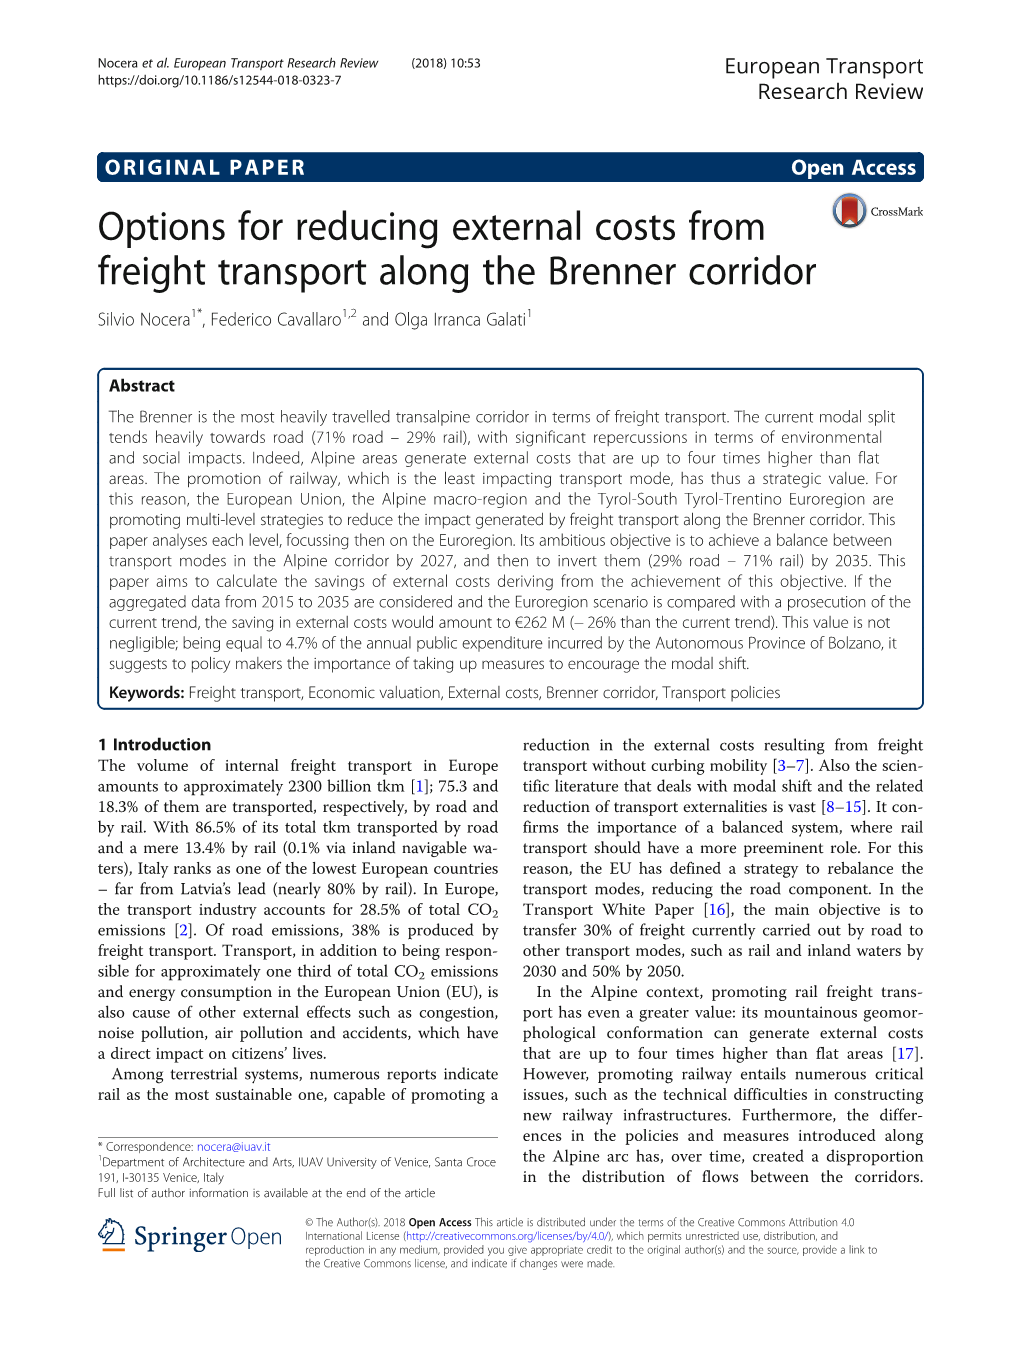 Options for Reducing External Costs from Freight Transport Along the Brenner Corridor Silvio Nocera1*, Federico Cavallaro1,2 and Olga Irranca Galati1